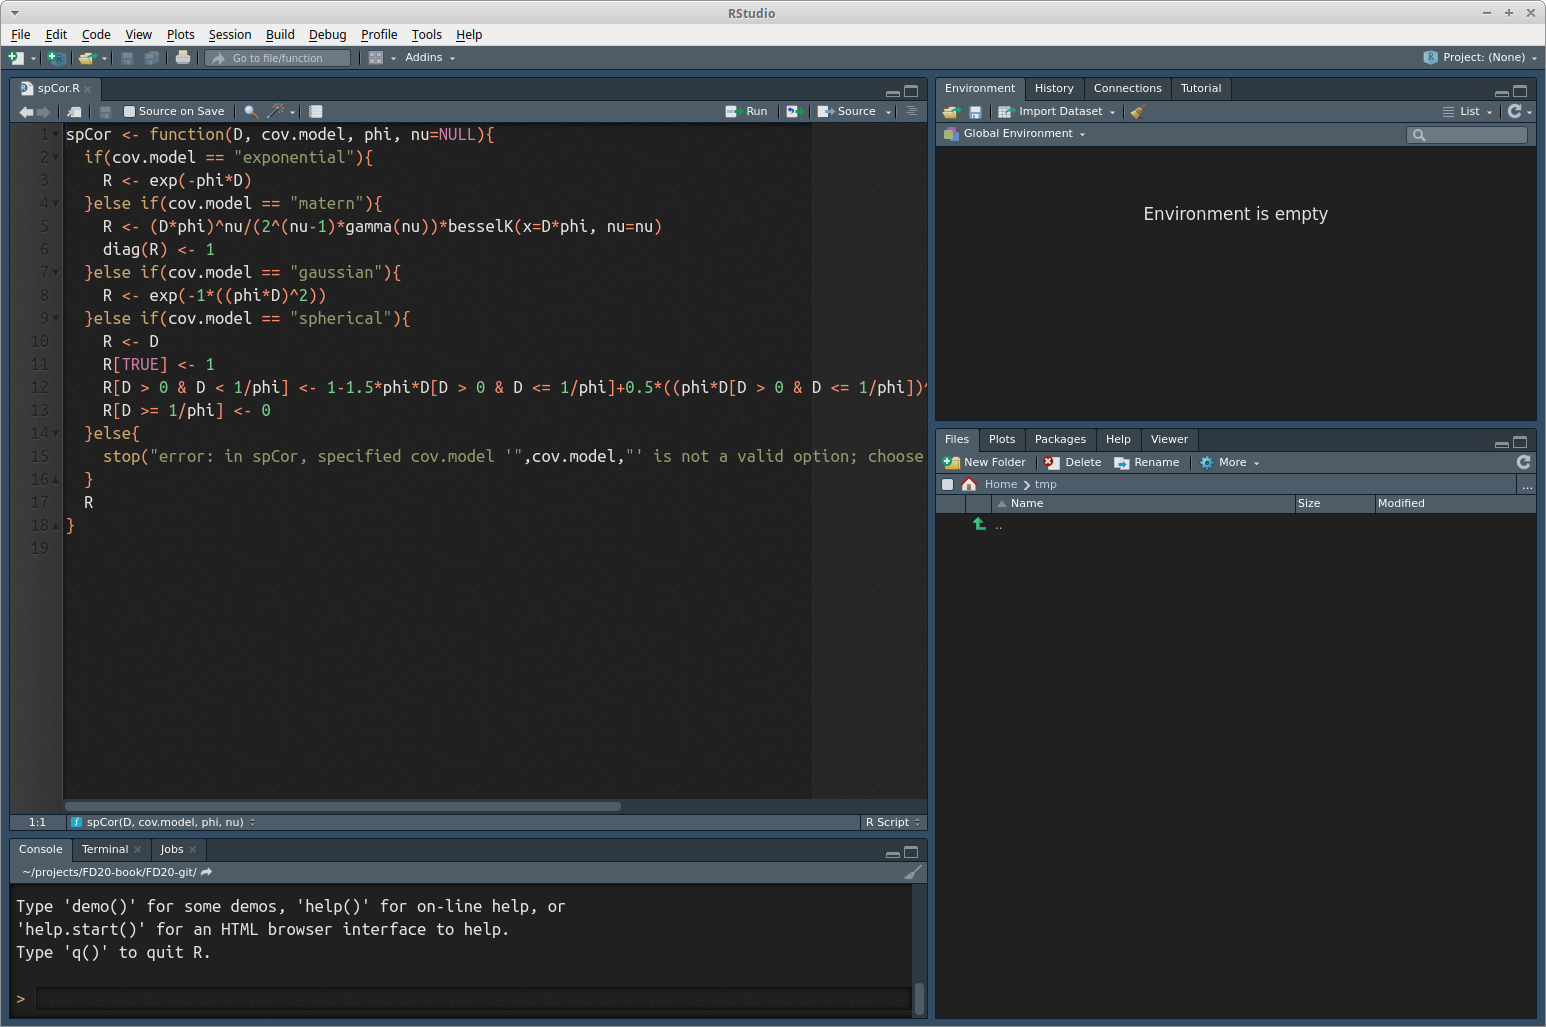 The RStudio IDE using the Modern theme and the Ambiance Editor theme